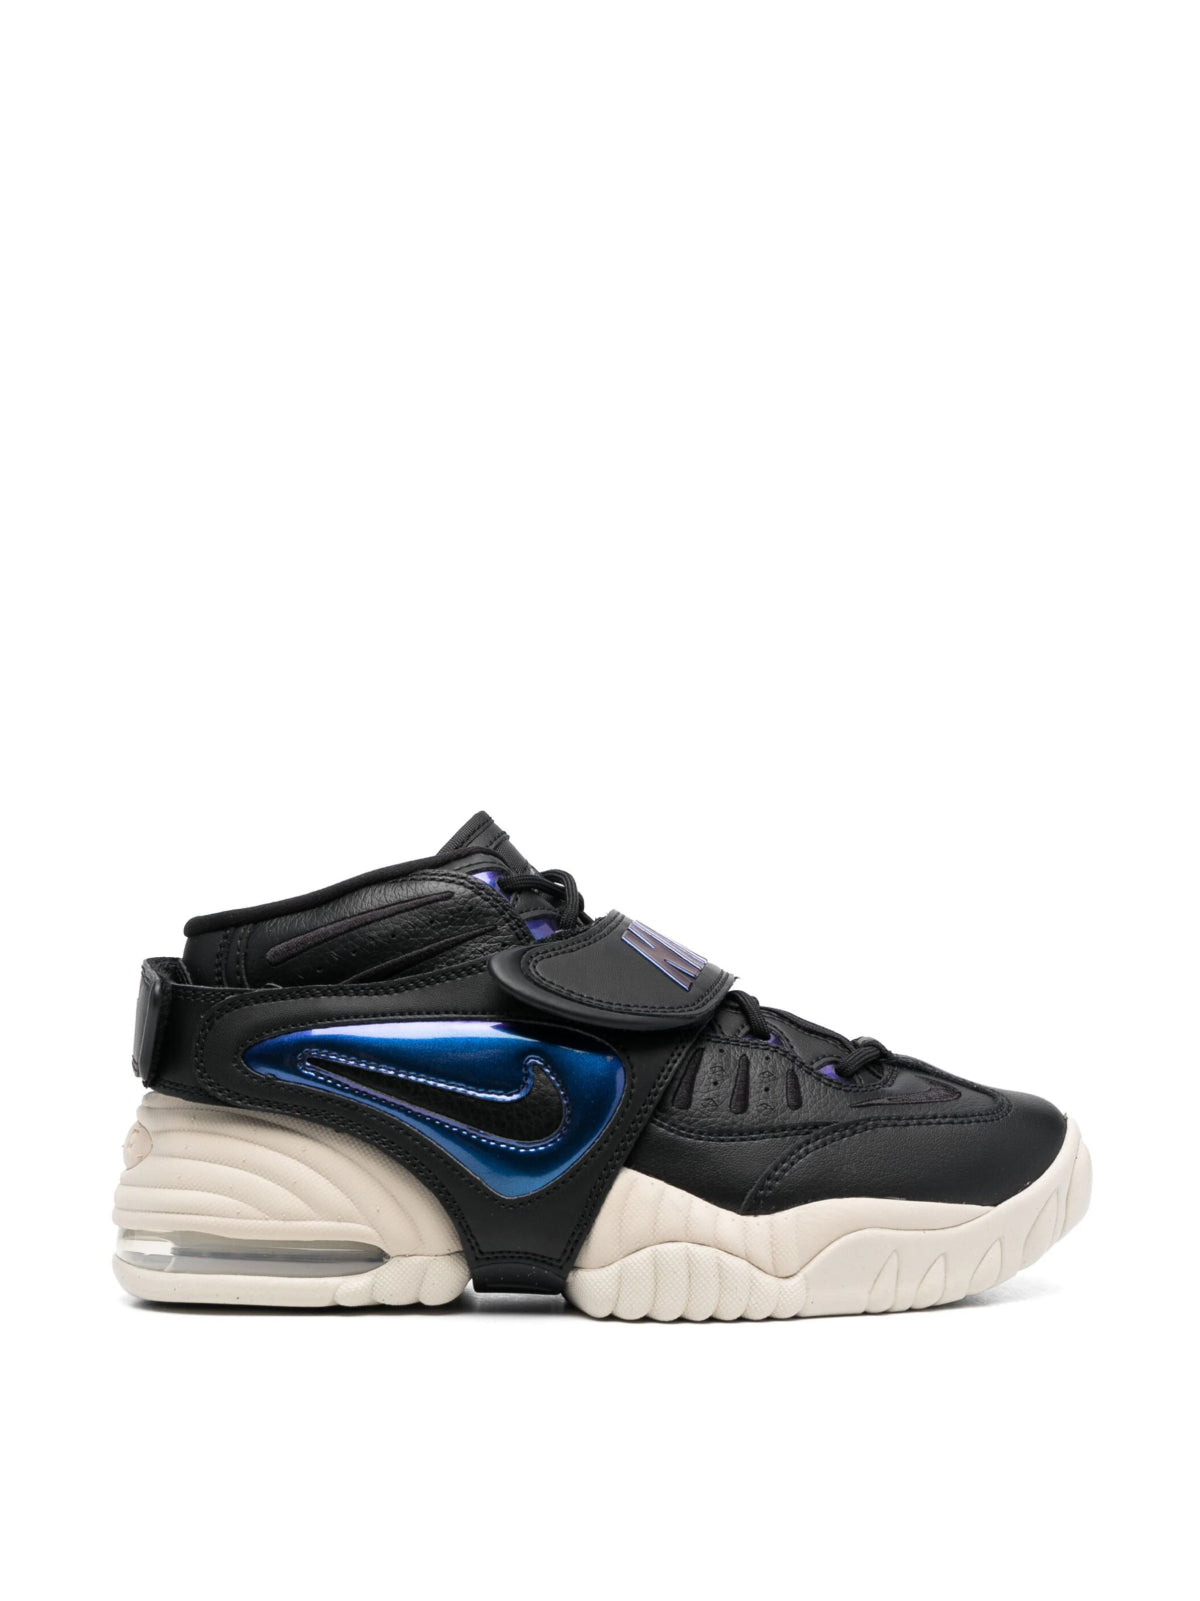 Nike-OUTLET-SALE-Air Adjust Force 2023 Sneakers-ARCHIVIST